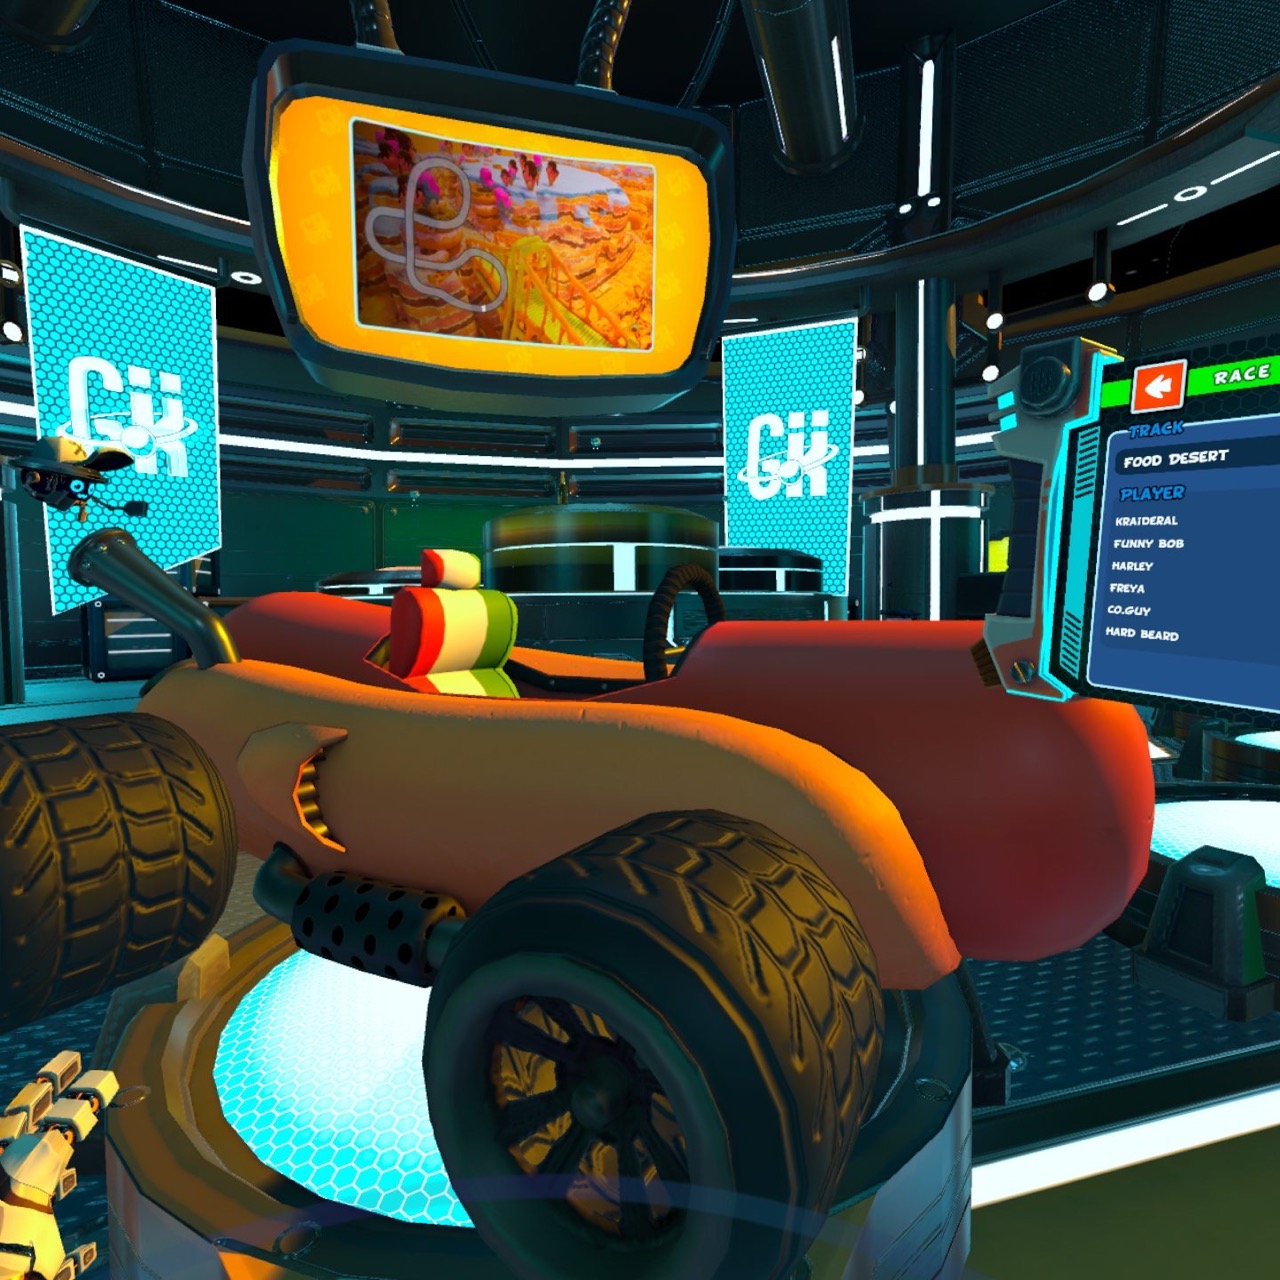 I genuinely hope VR Monkey continues updating and improving the game, as the core mechanic of driving the kart is really good, but the rest kinda holds it down.